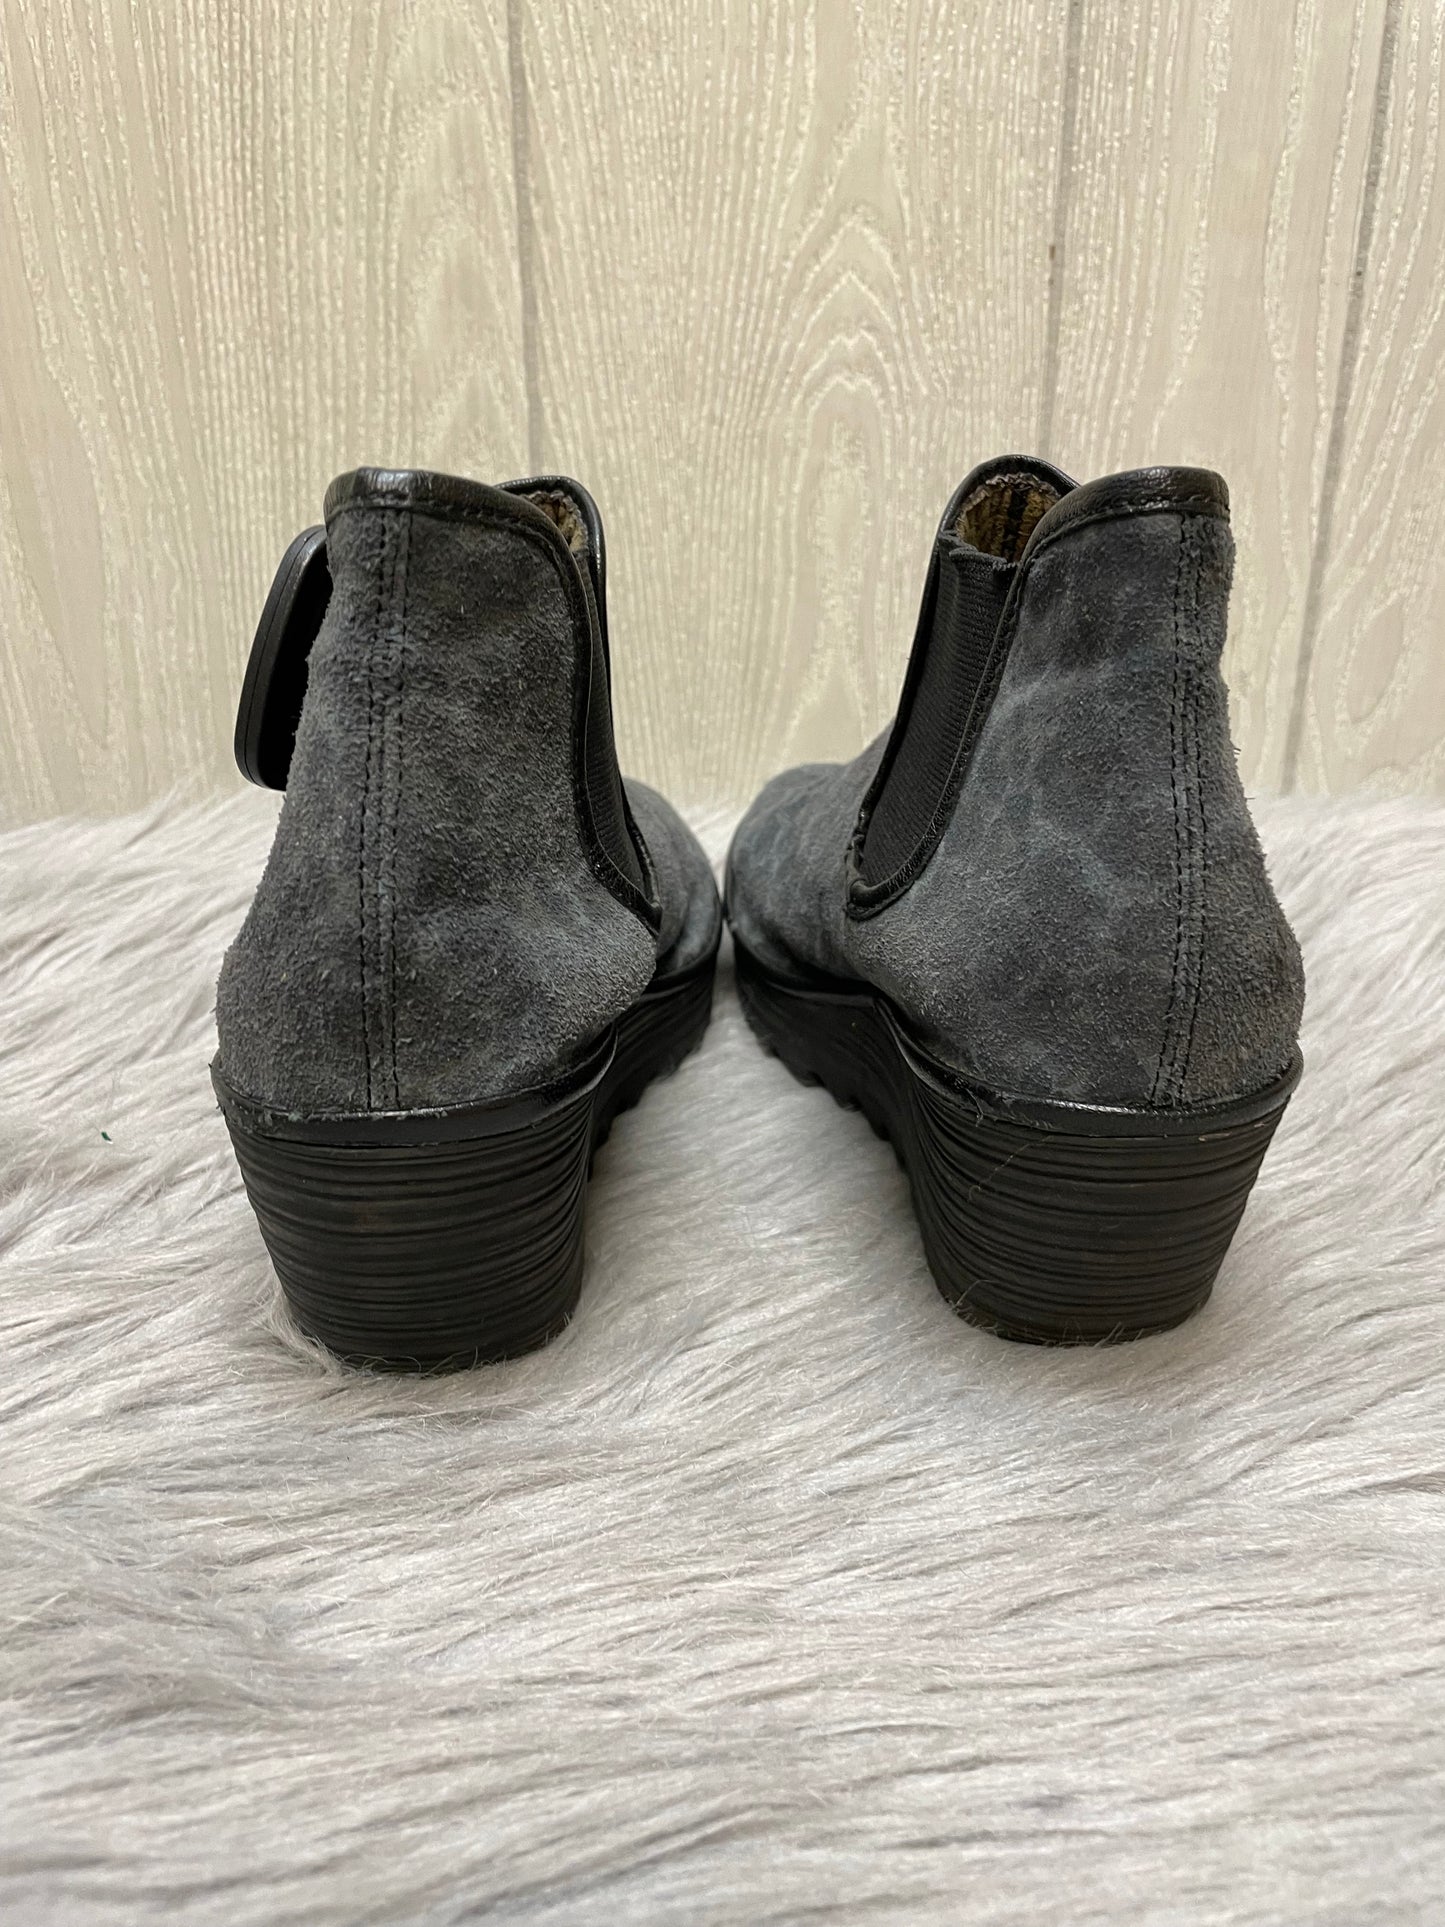 Boots Ankle Heels By Fly London  Size: 11